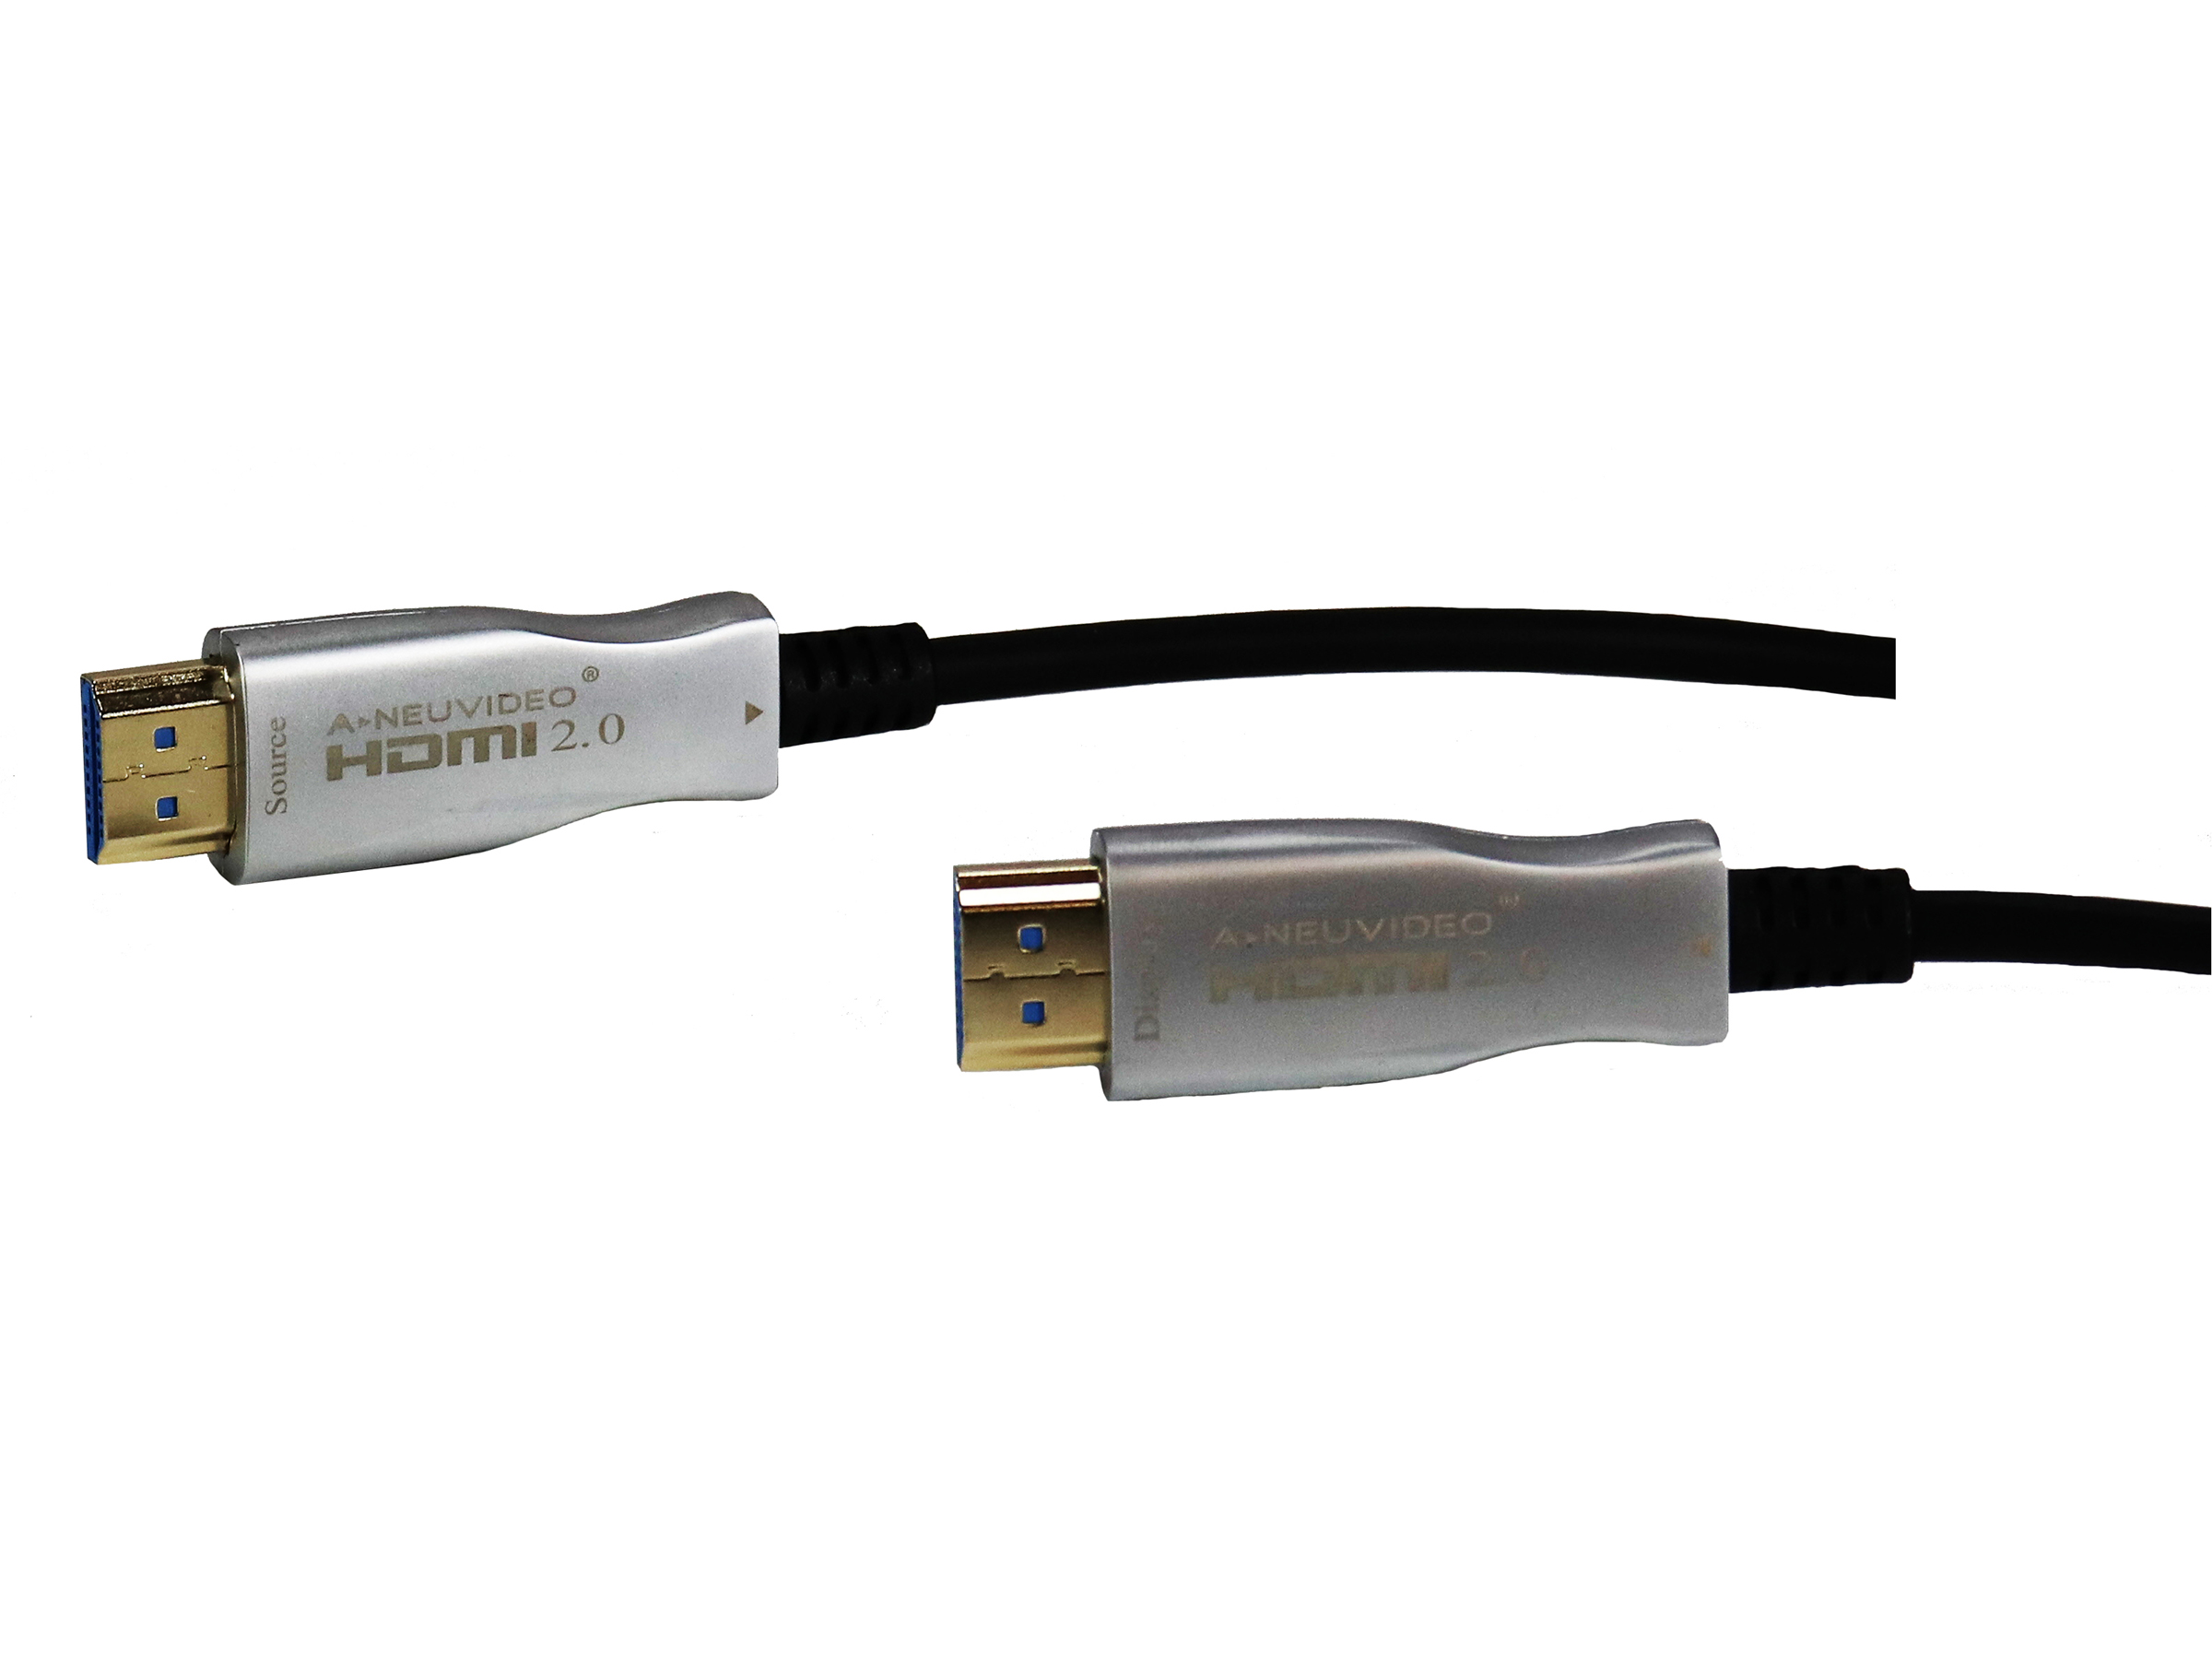 ANI-AOC-40 Fiber Optic Hdmi Active Optical Cable - 40m/131ft by A-NeuVideo